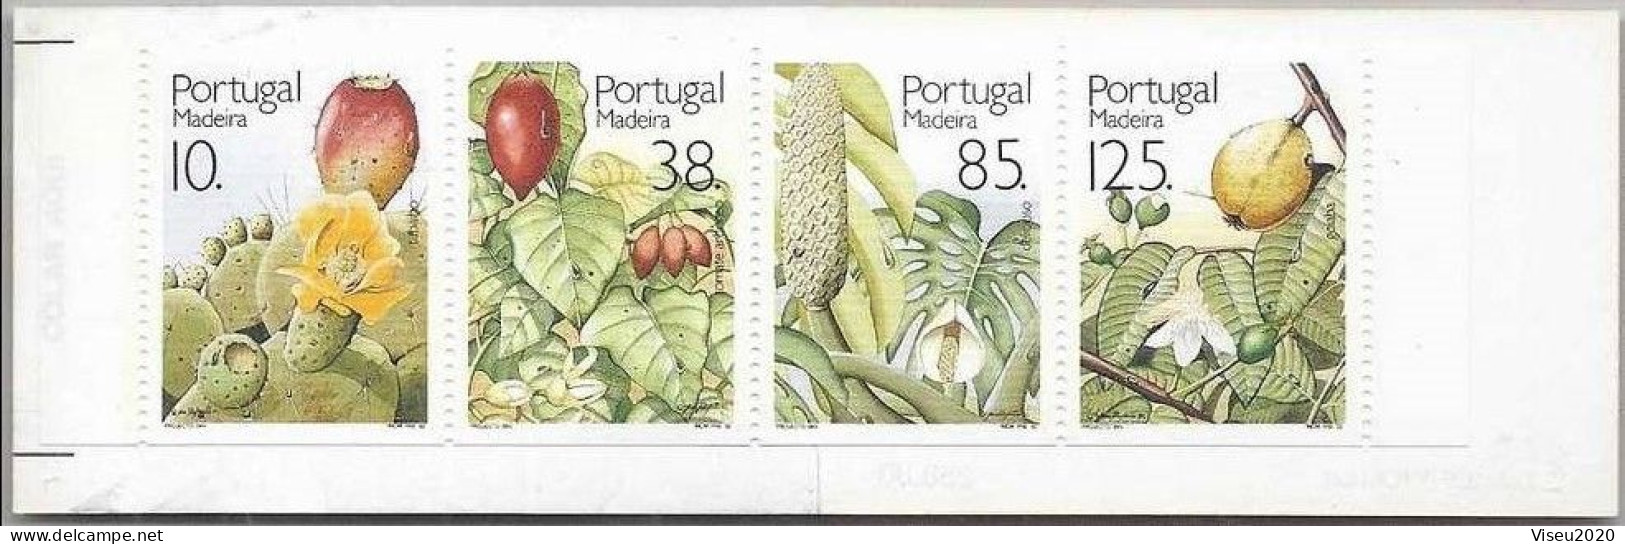 Portugal Booklet  Afinsa 83 - MADEIRA 1992 Fruits And Plants Of Subtropic Region MNH - Booklets